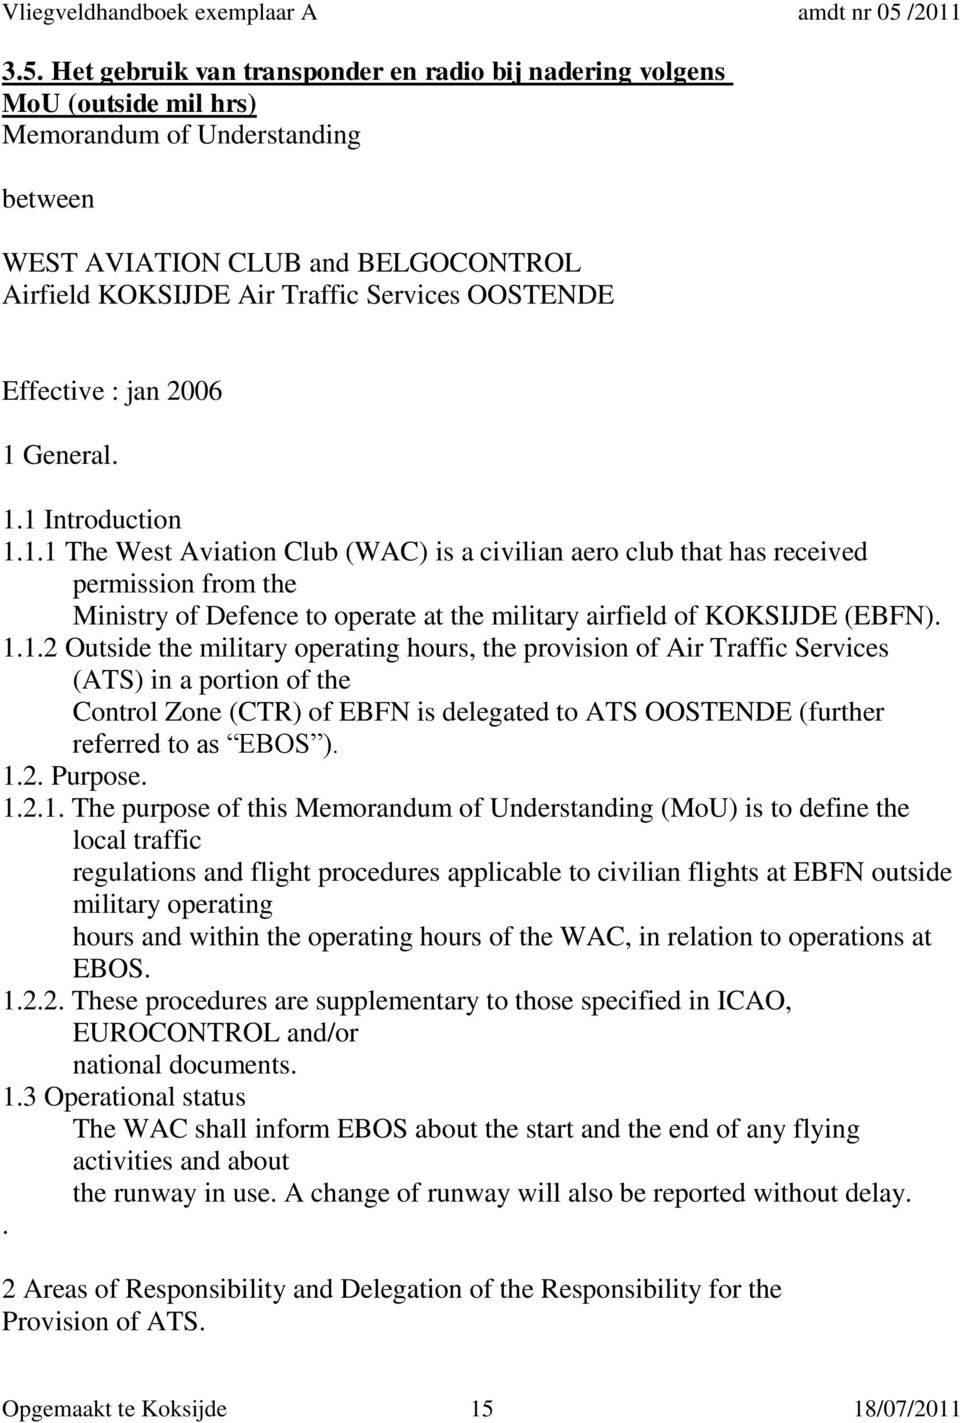 1.1.2 Outside the military operating hours, the provision of Air Traffic Services (ATS) in a portion of the Control Zone (CTR) of EBFN is delegated to ATS OOSTENDE (further referred to as EBOS ). 1.2. Purpose.